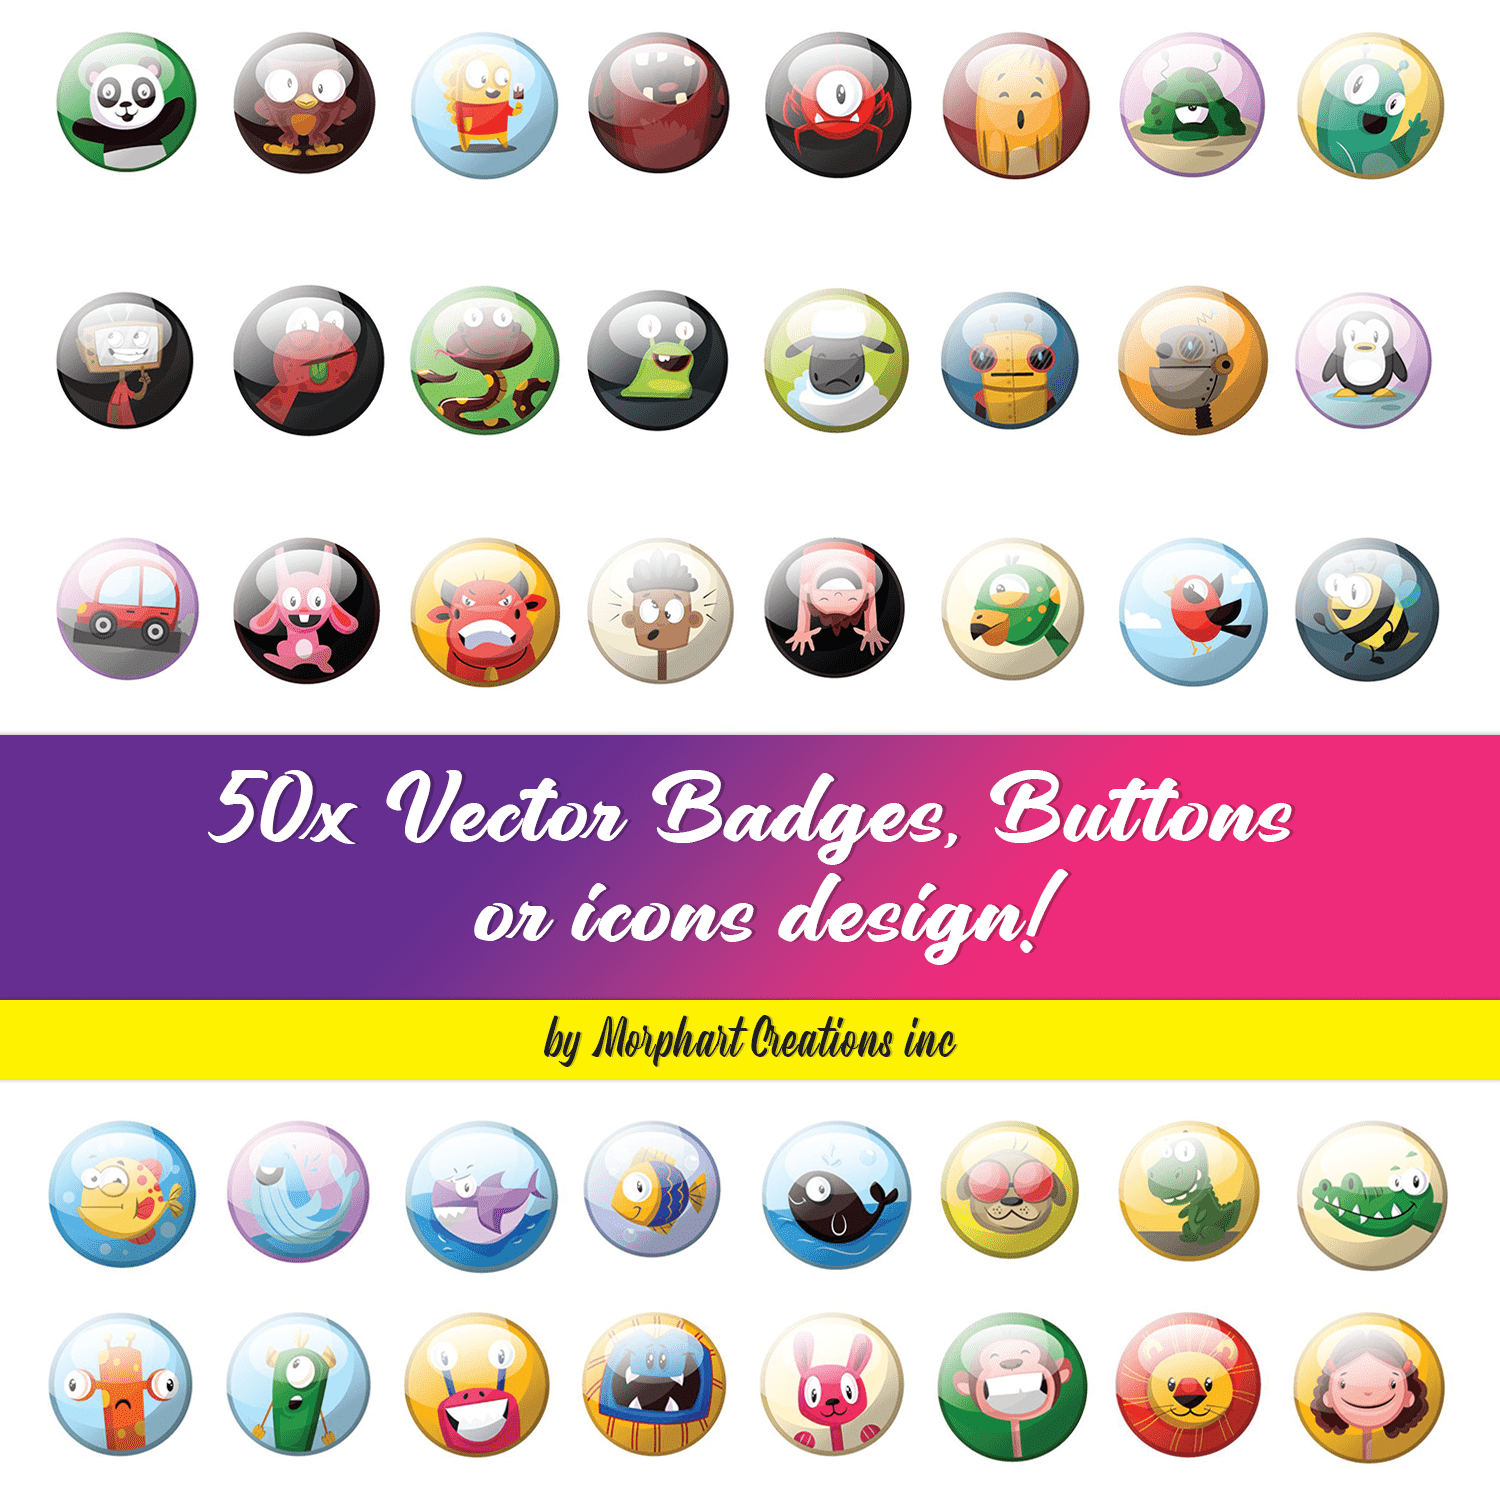 Set of images of adorable cartoon badges.